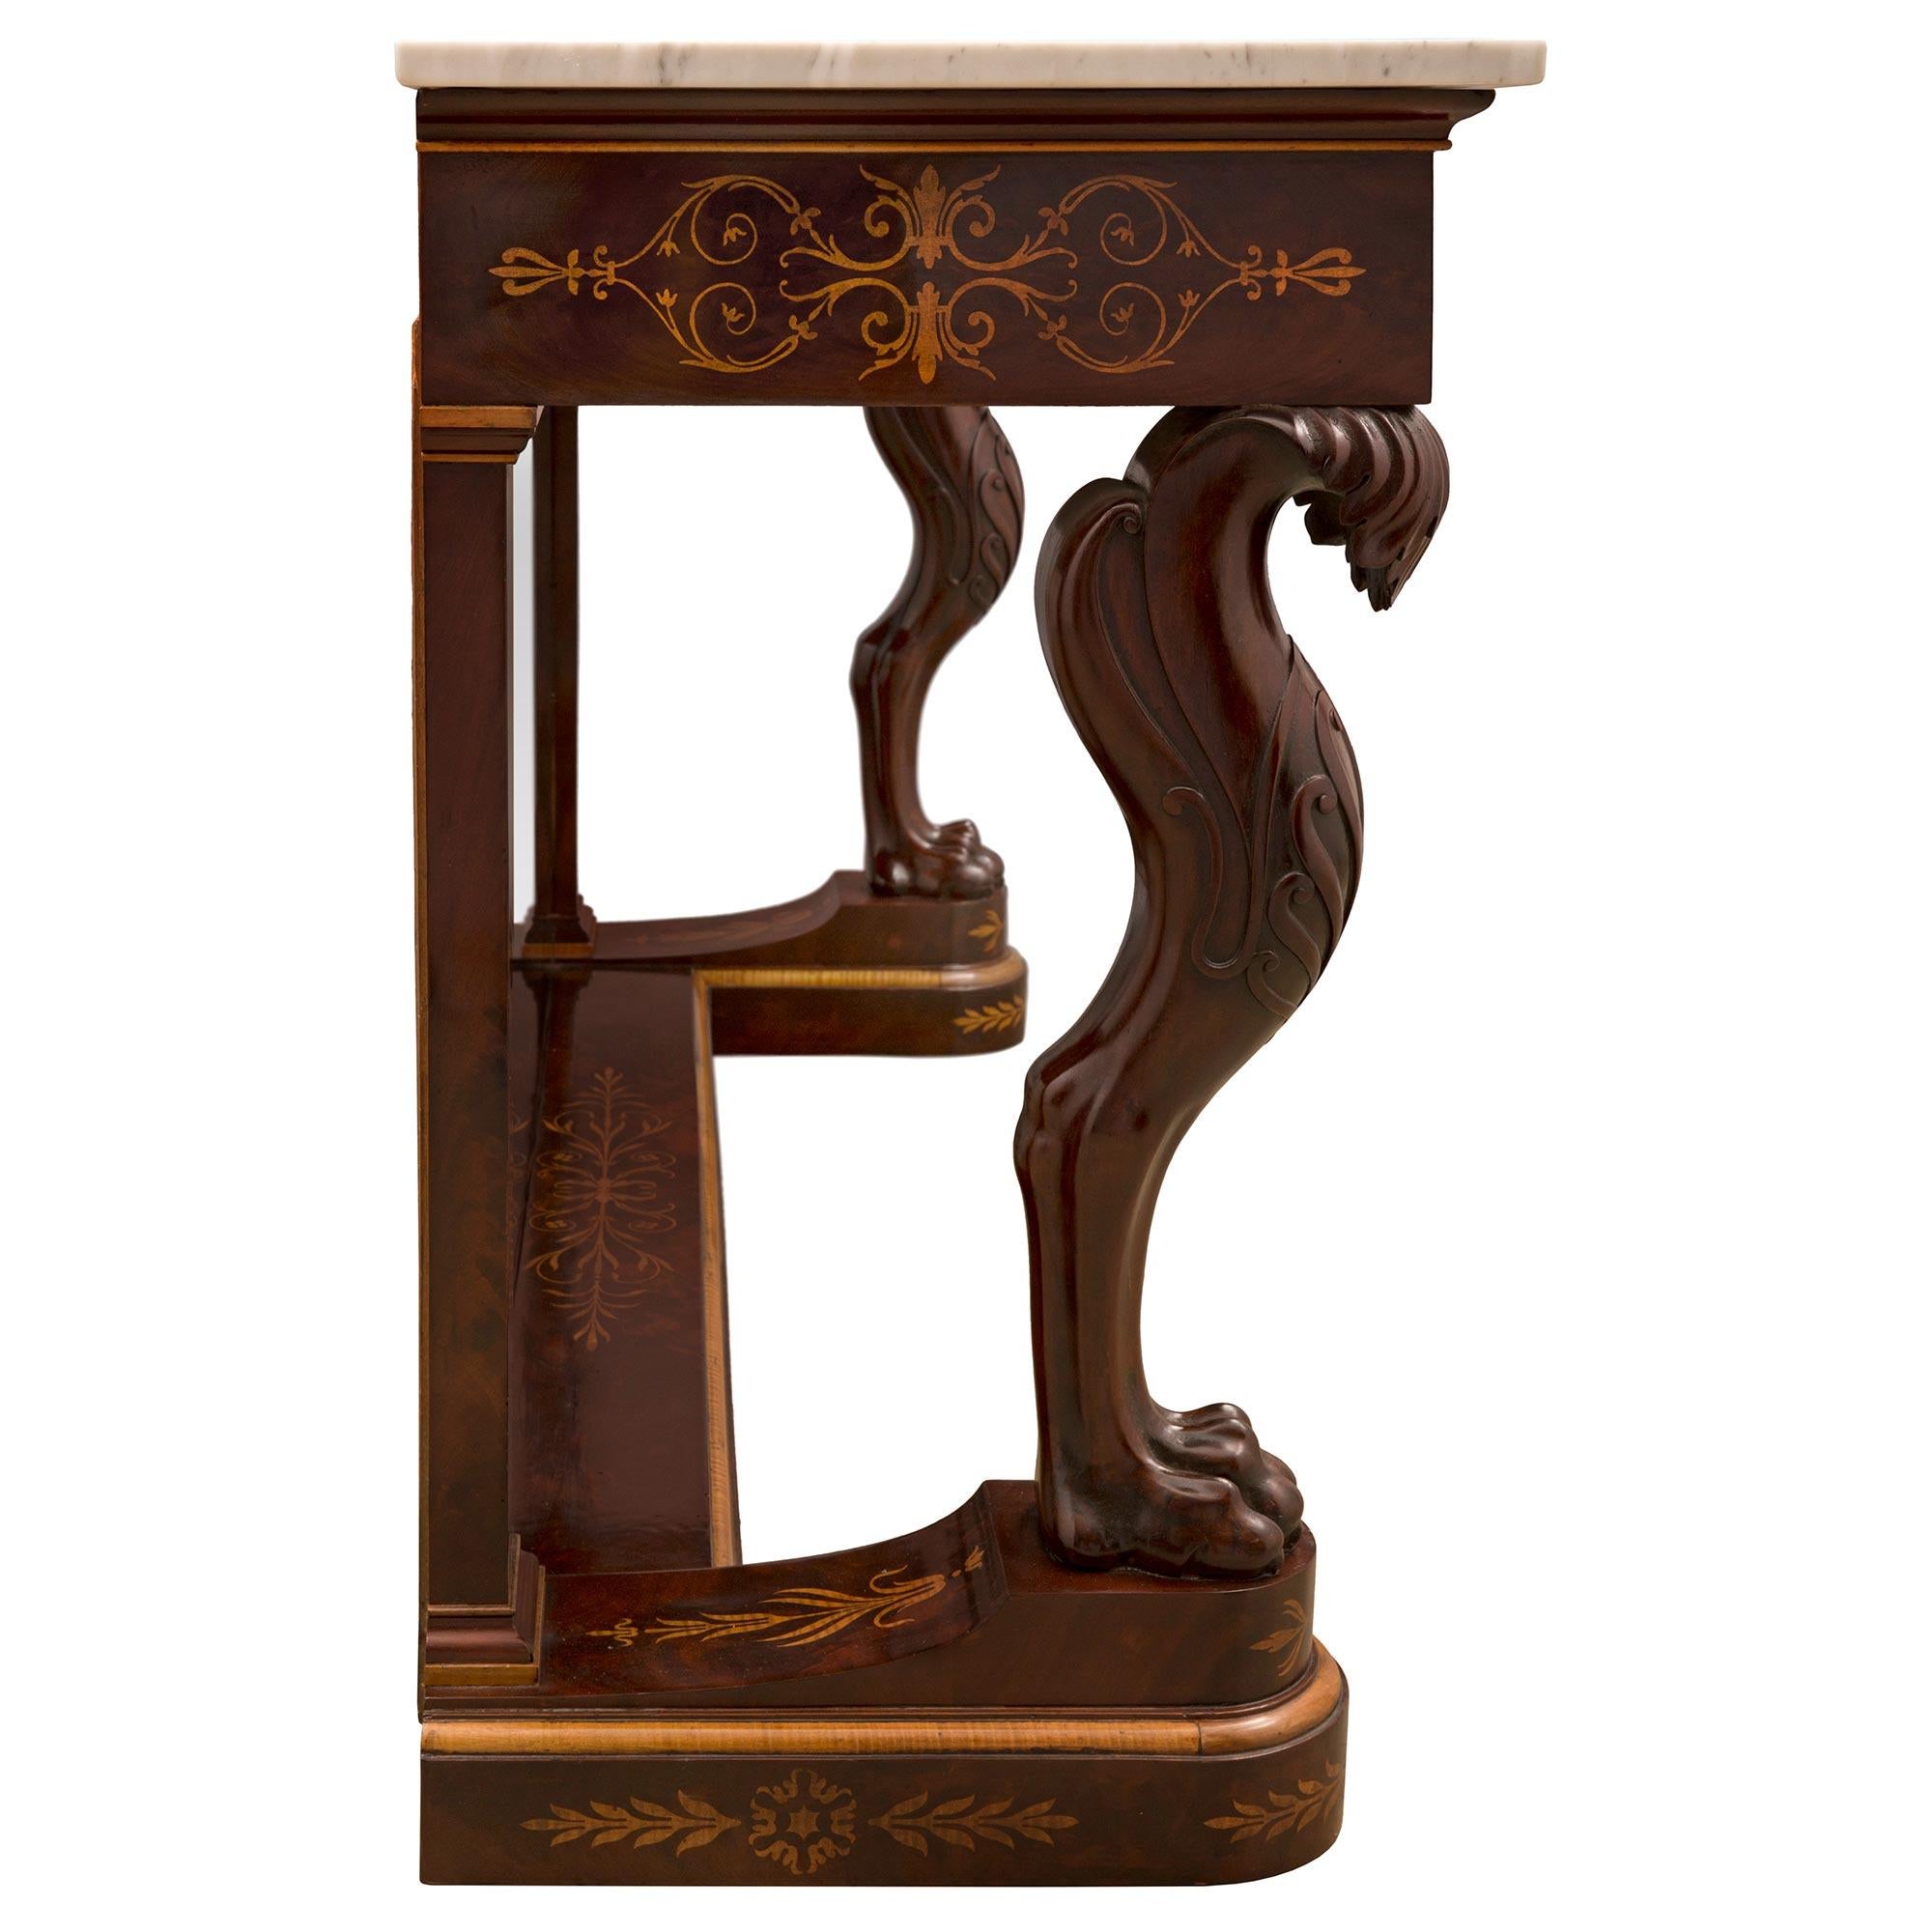 French 19th Century Charles X Period Flamed Mahogany Freestanding Console In Good Condition For Sale In West Palm Beach, FL